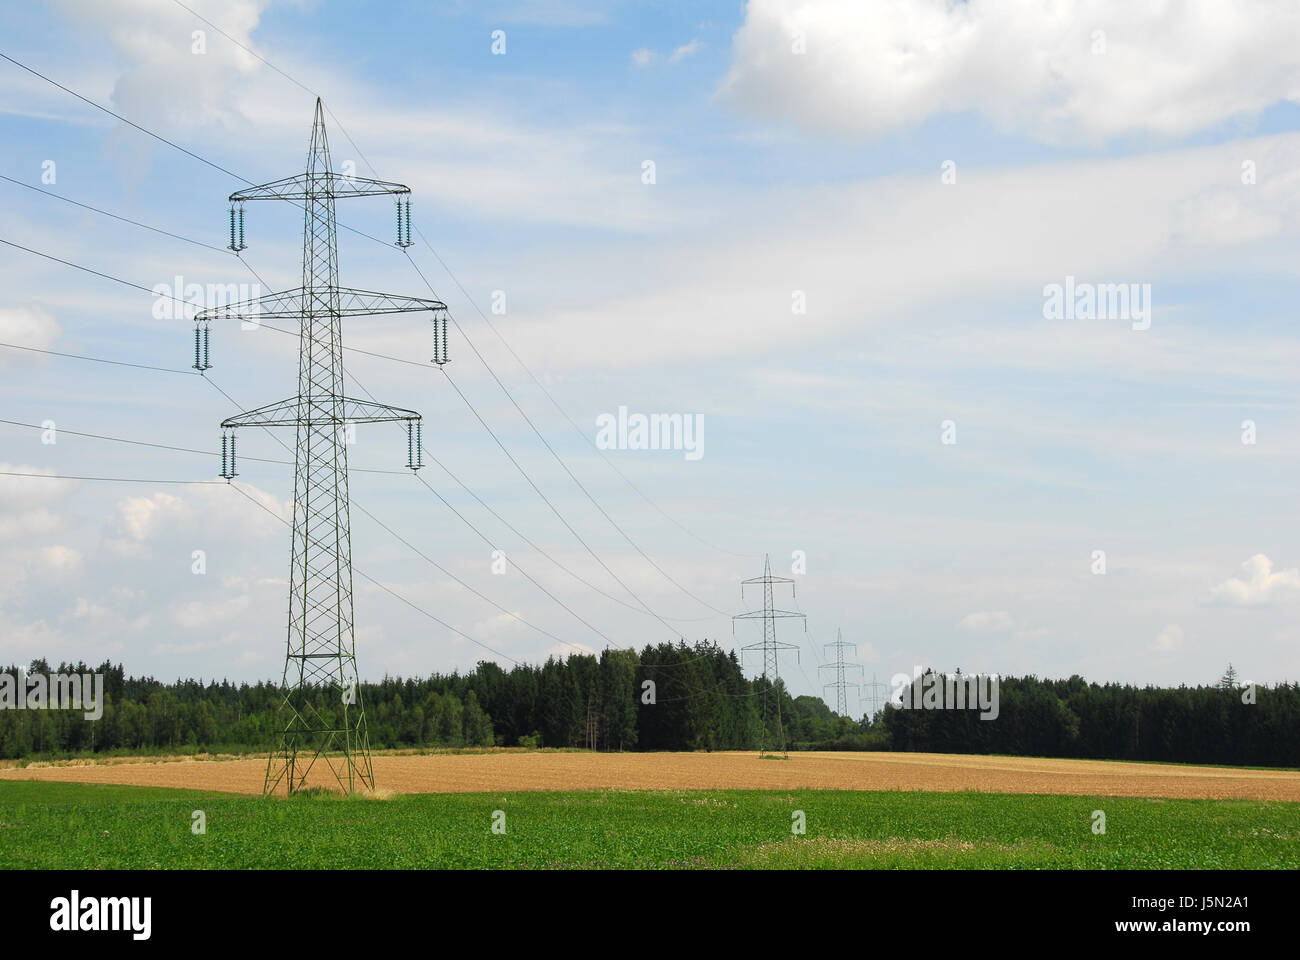 energy power electricity electric power caution voltage high tension danger to Stock Photo